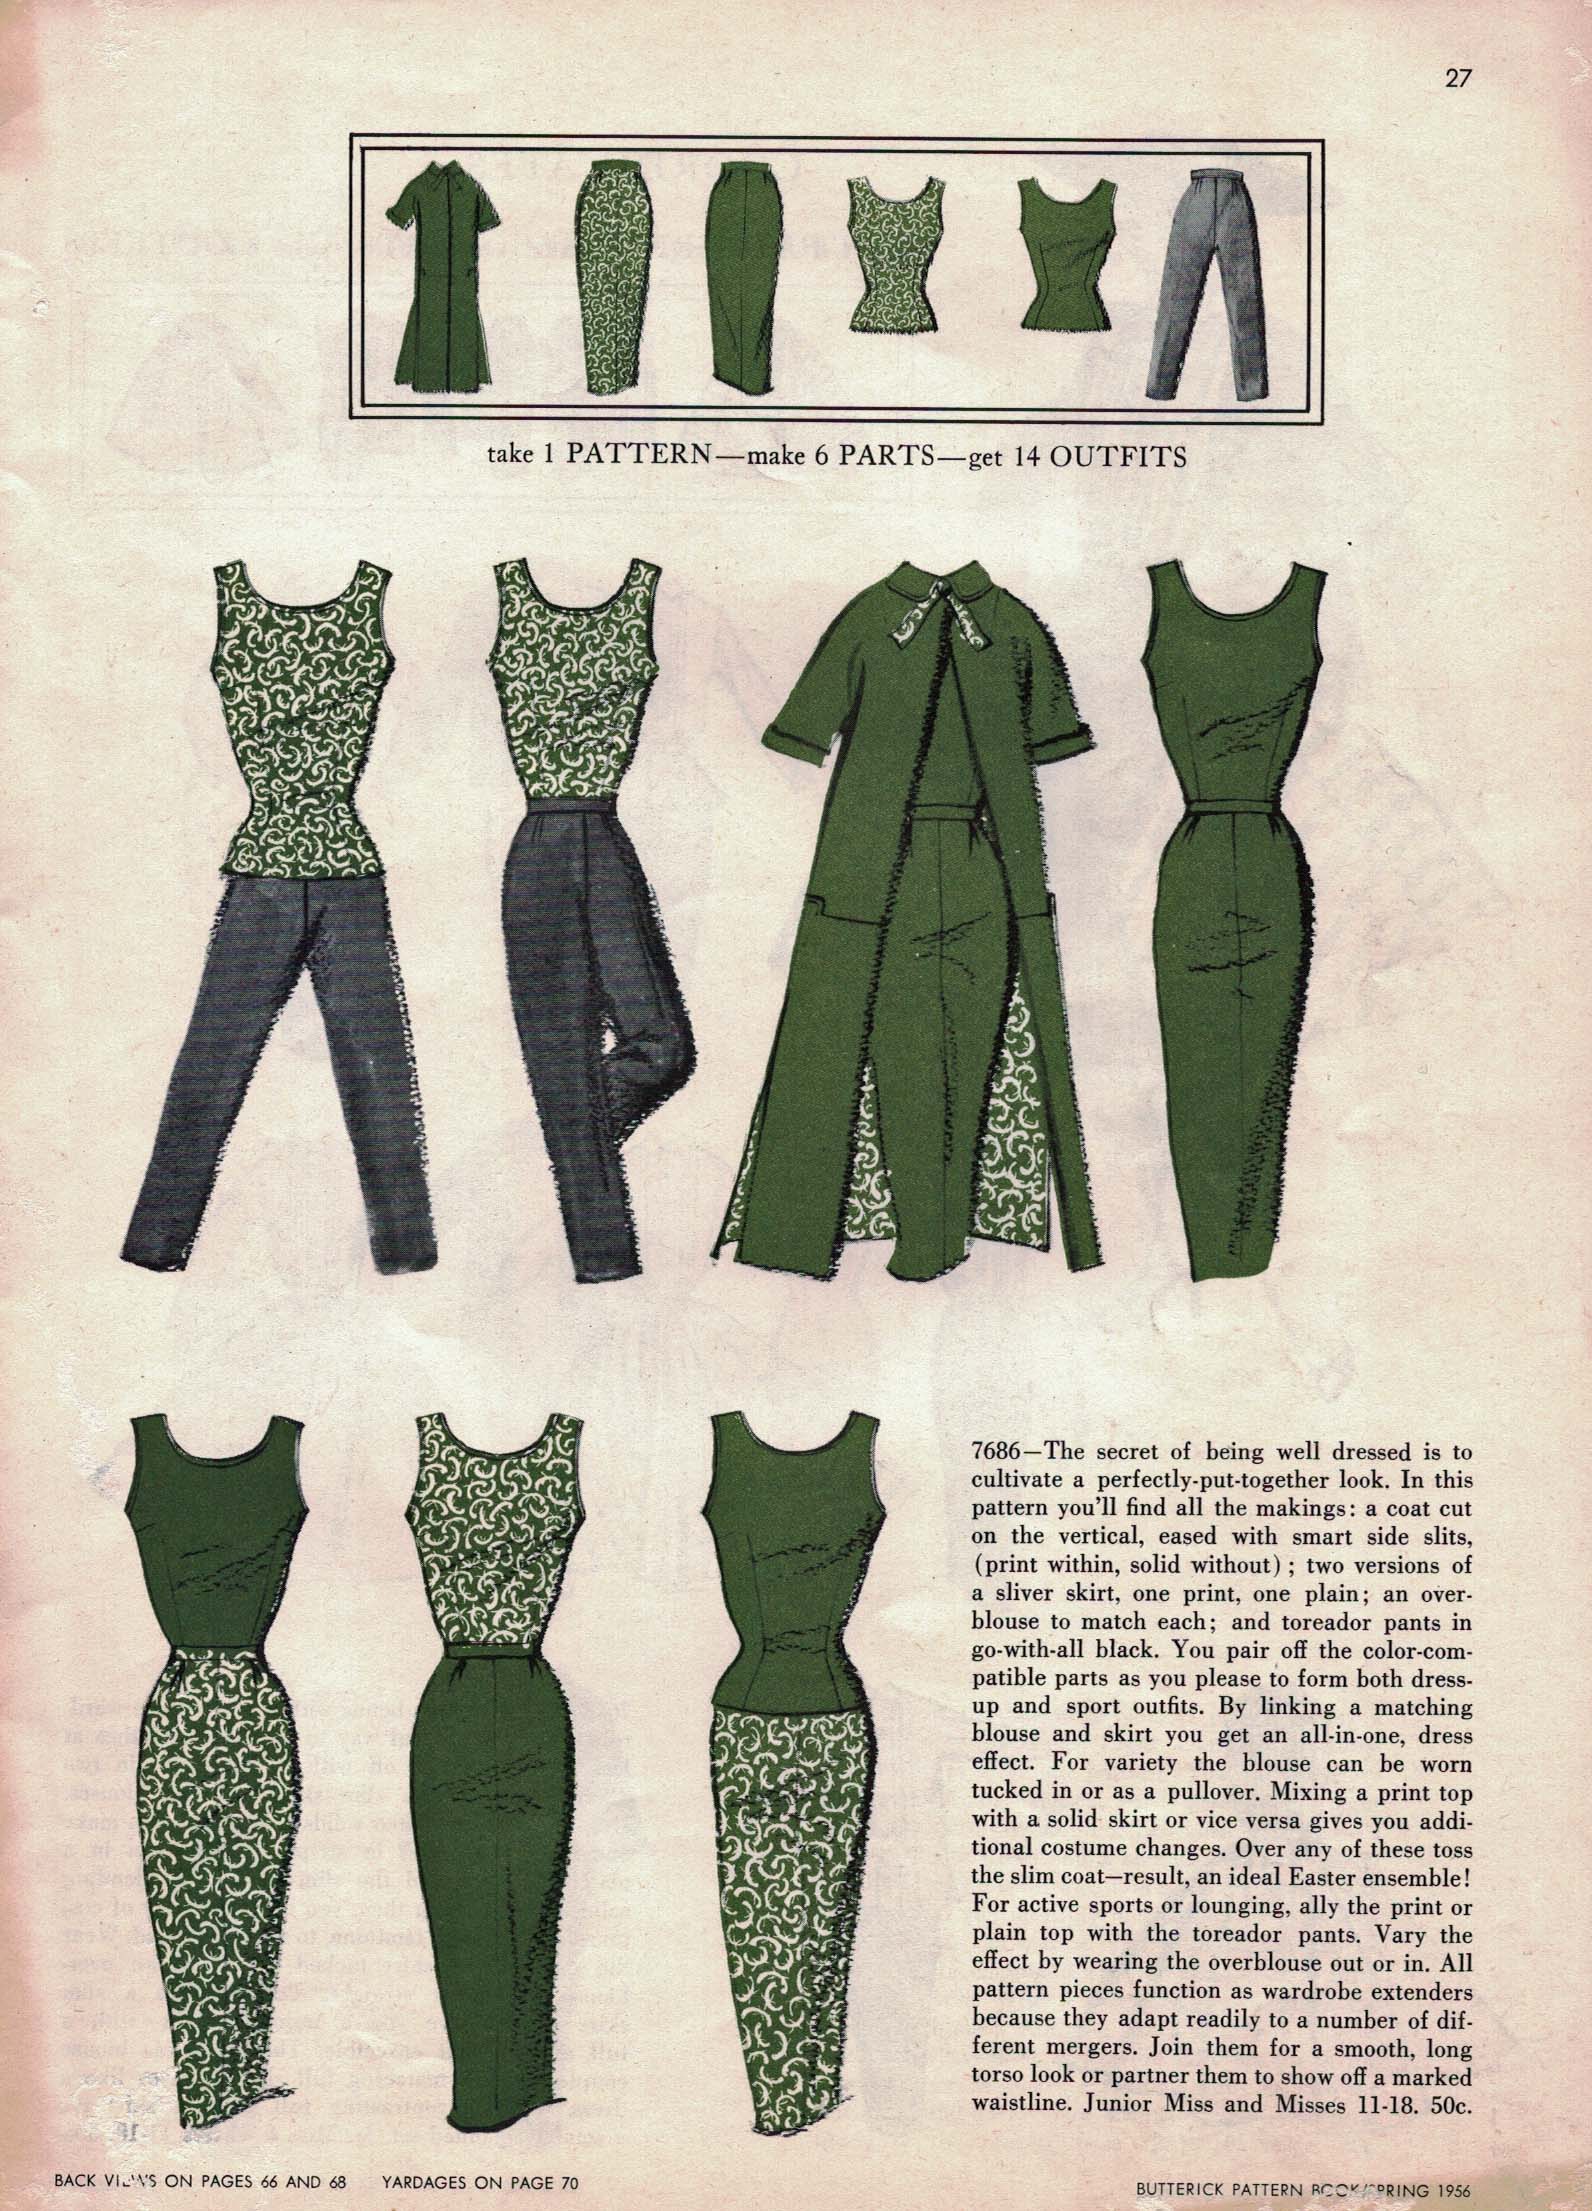 Butterick Pattern Book, Spring 1956. Click to enlarge